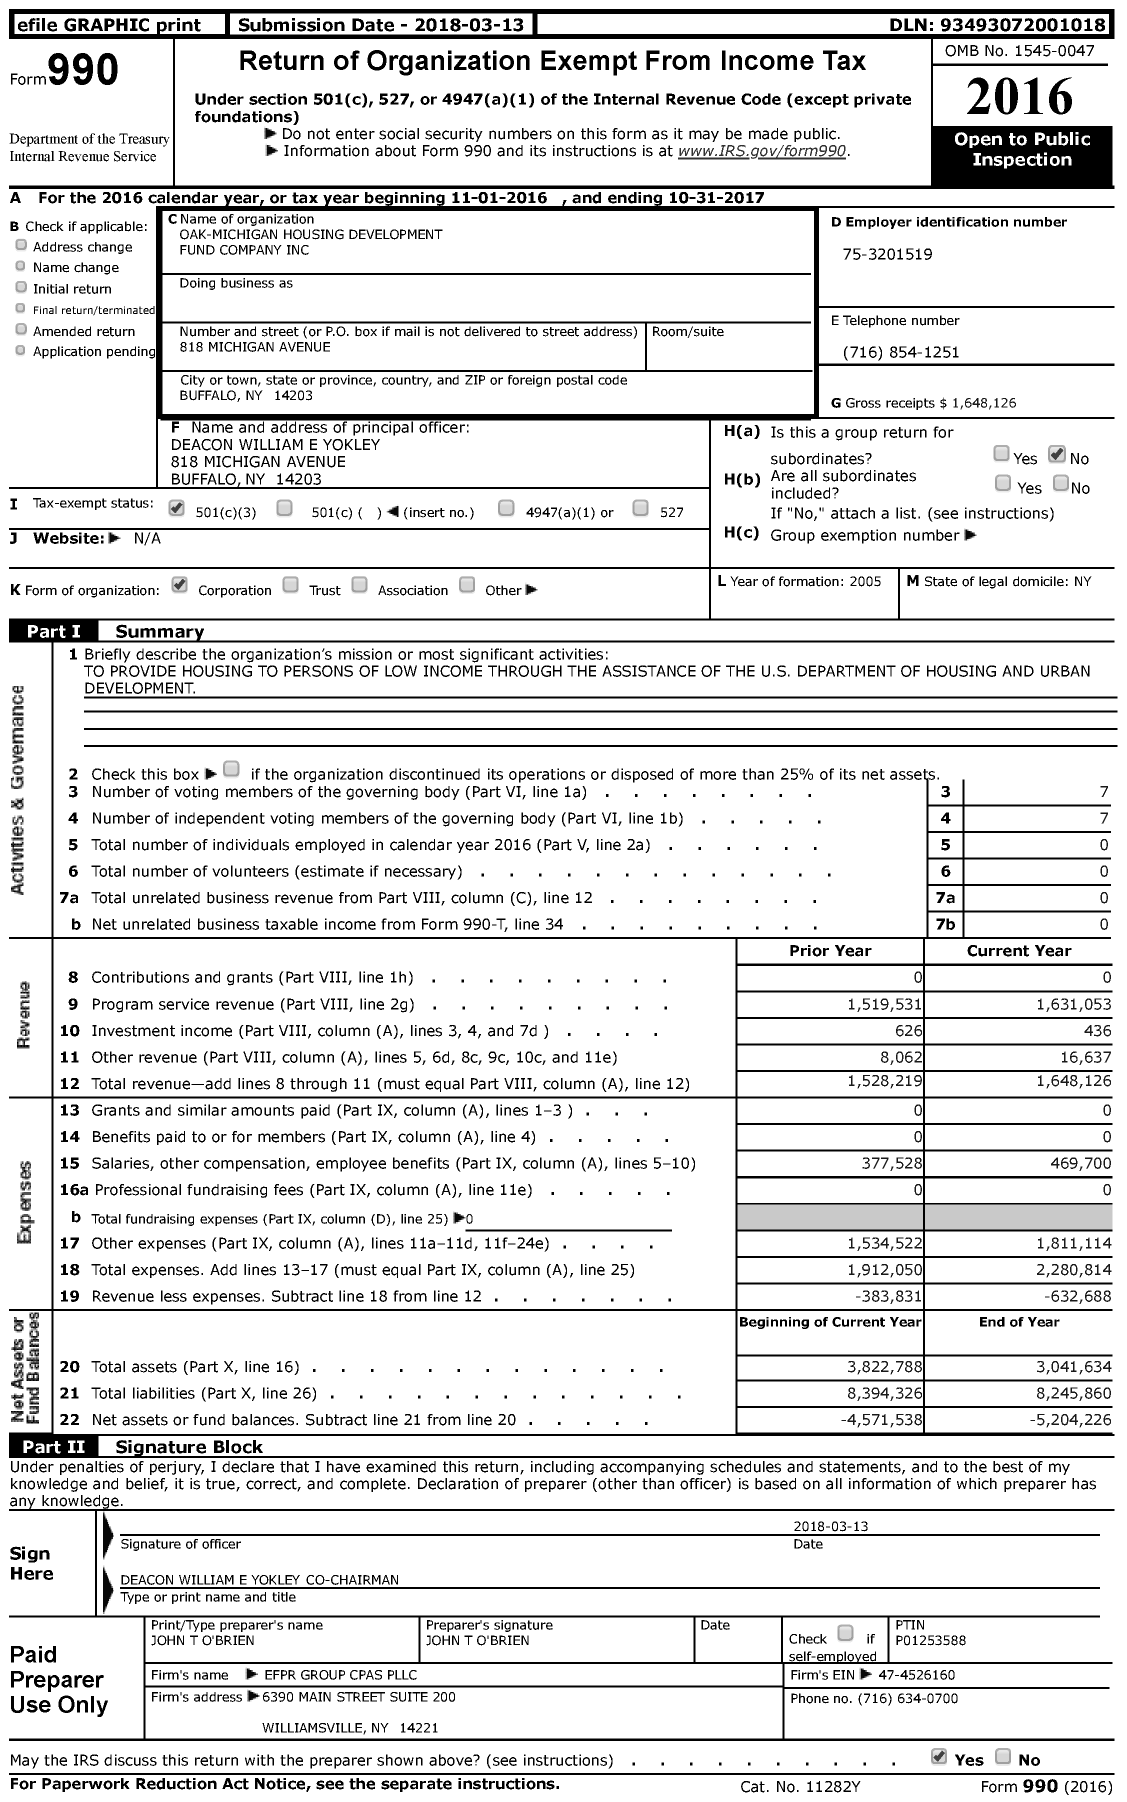 Image of first page of 2016 Form 990 for Oak-Michigan Housing Development Fund Company